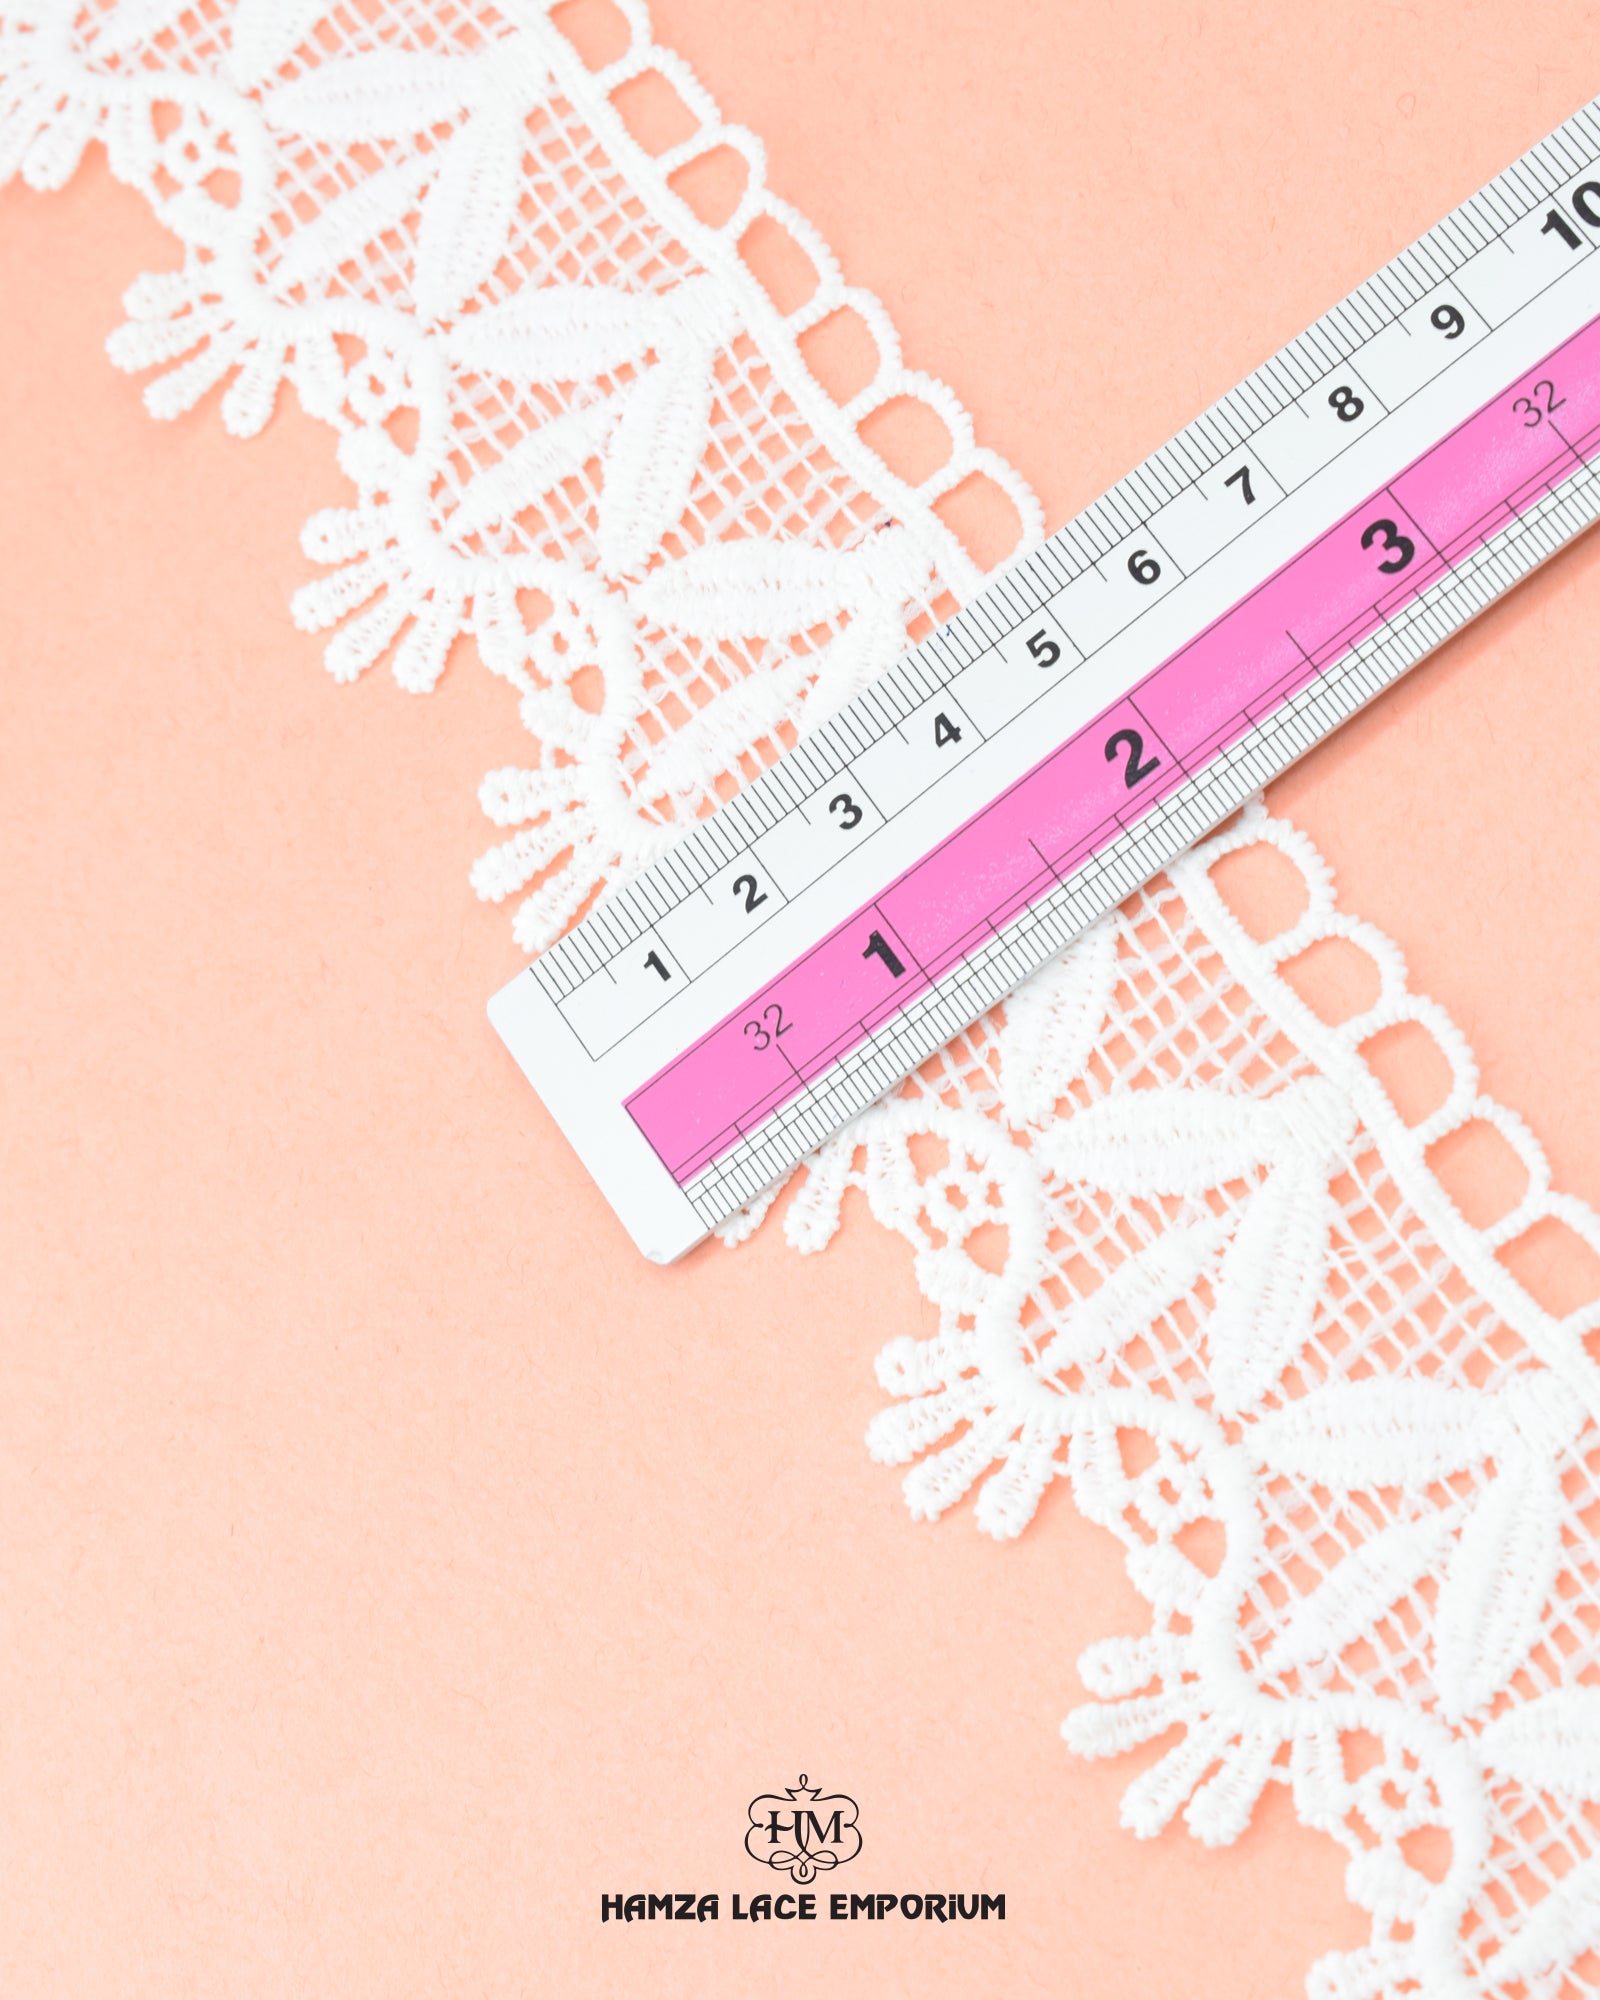 Size of the 'Edging Flower Lace 23453' is shown as '2.25' inches with the help of a ruler